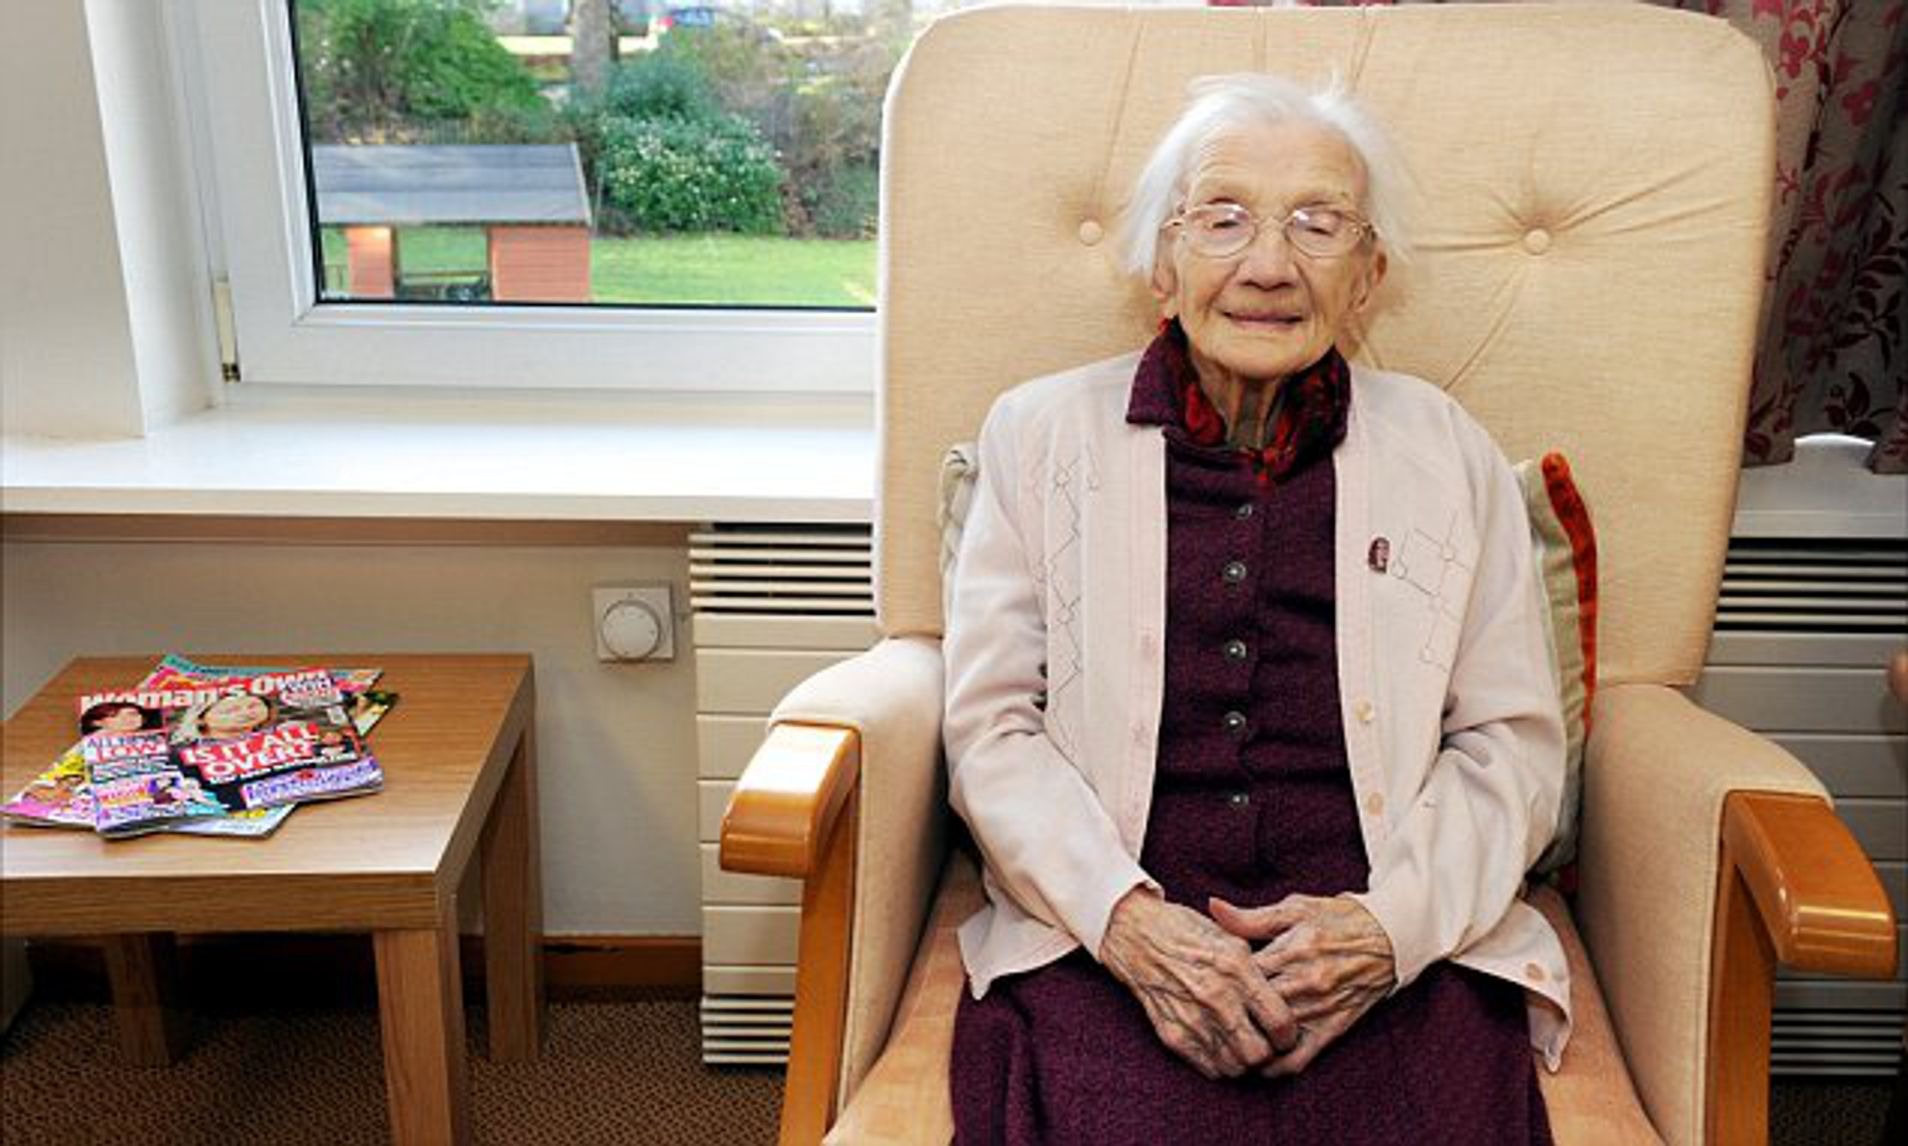 A 114-year-old woman has named a shocking secret to longevity